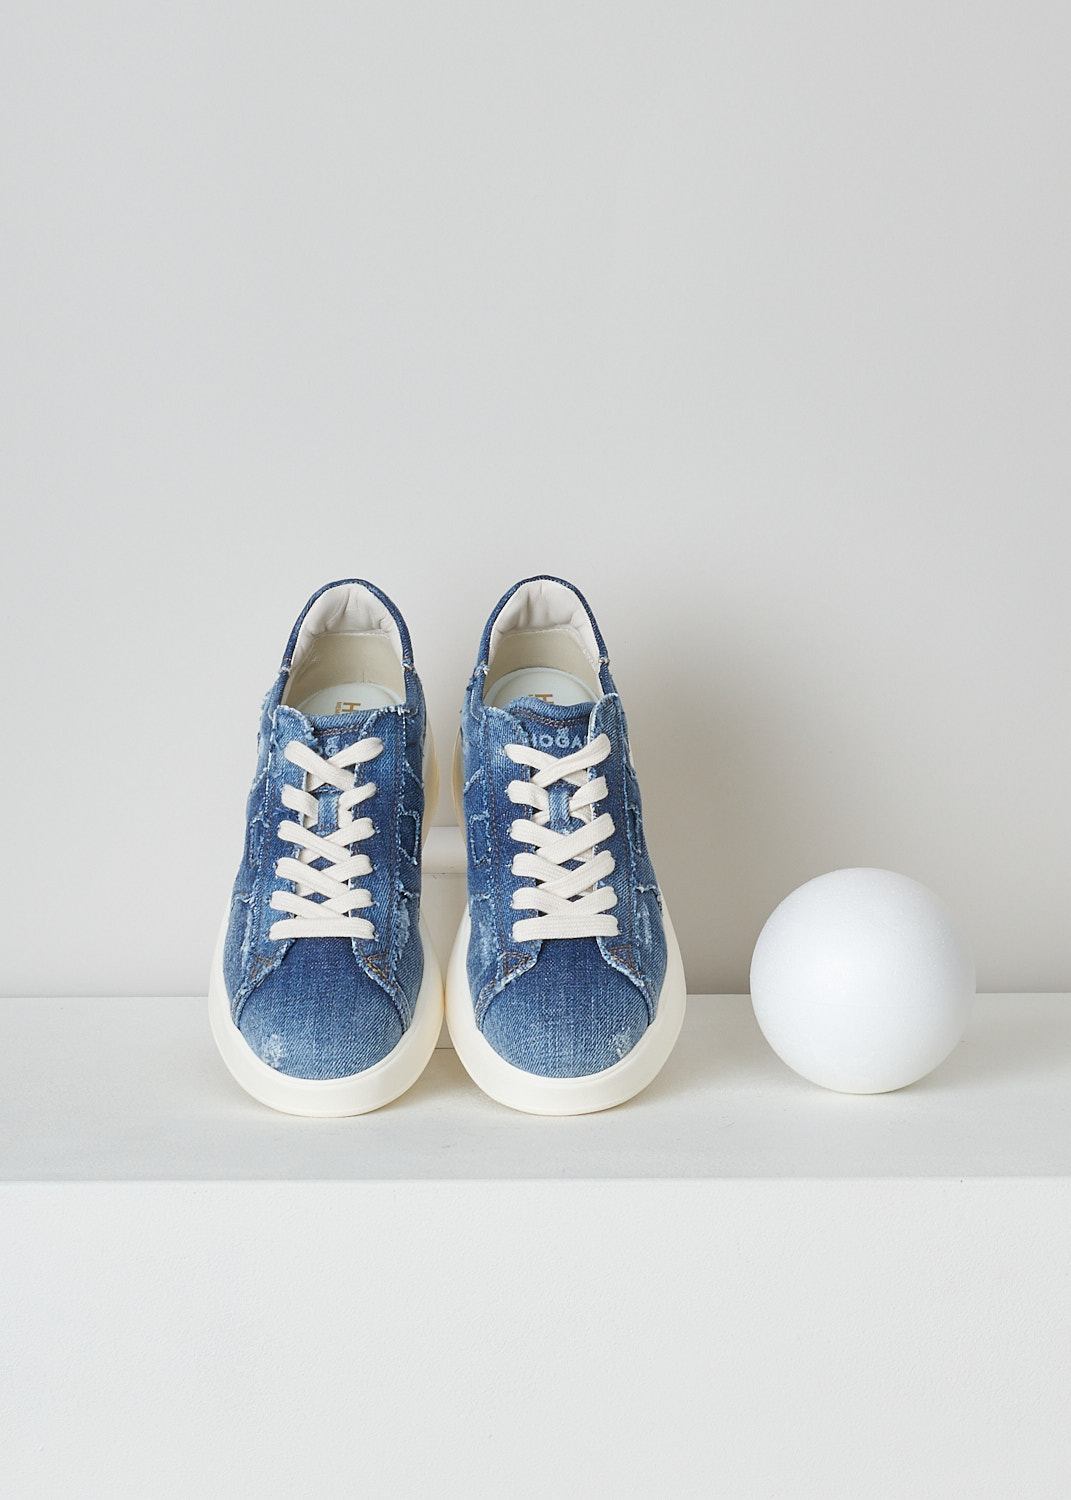 HOGAN, REBEL H562 ALL JEANS SNEAKER, GYW5620EY80JDLU803_H562, Blue, Top, These Rebel H562 All Jeans sneakers are made in a distressed denim fabric. These sneakers have a front lace-up fastening with white laces. These sneakers have a round nose and a broad white rubber sole. On the sides, the brand's H logo is incorporated in the design. The sneakers come with an additional pair of laces in blue. 
